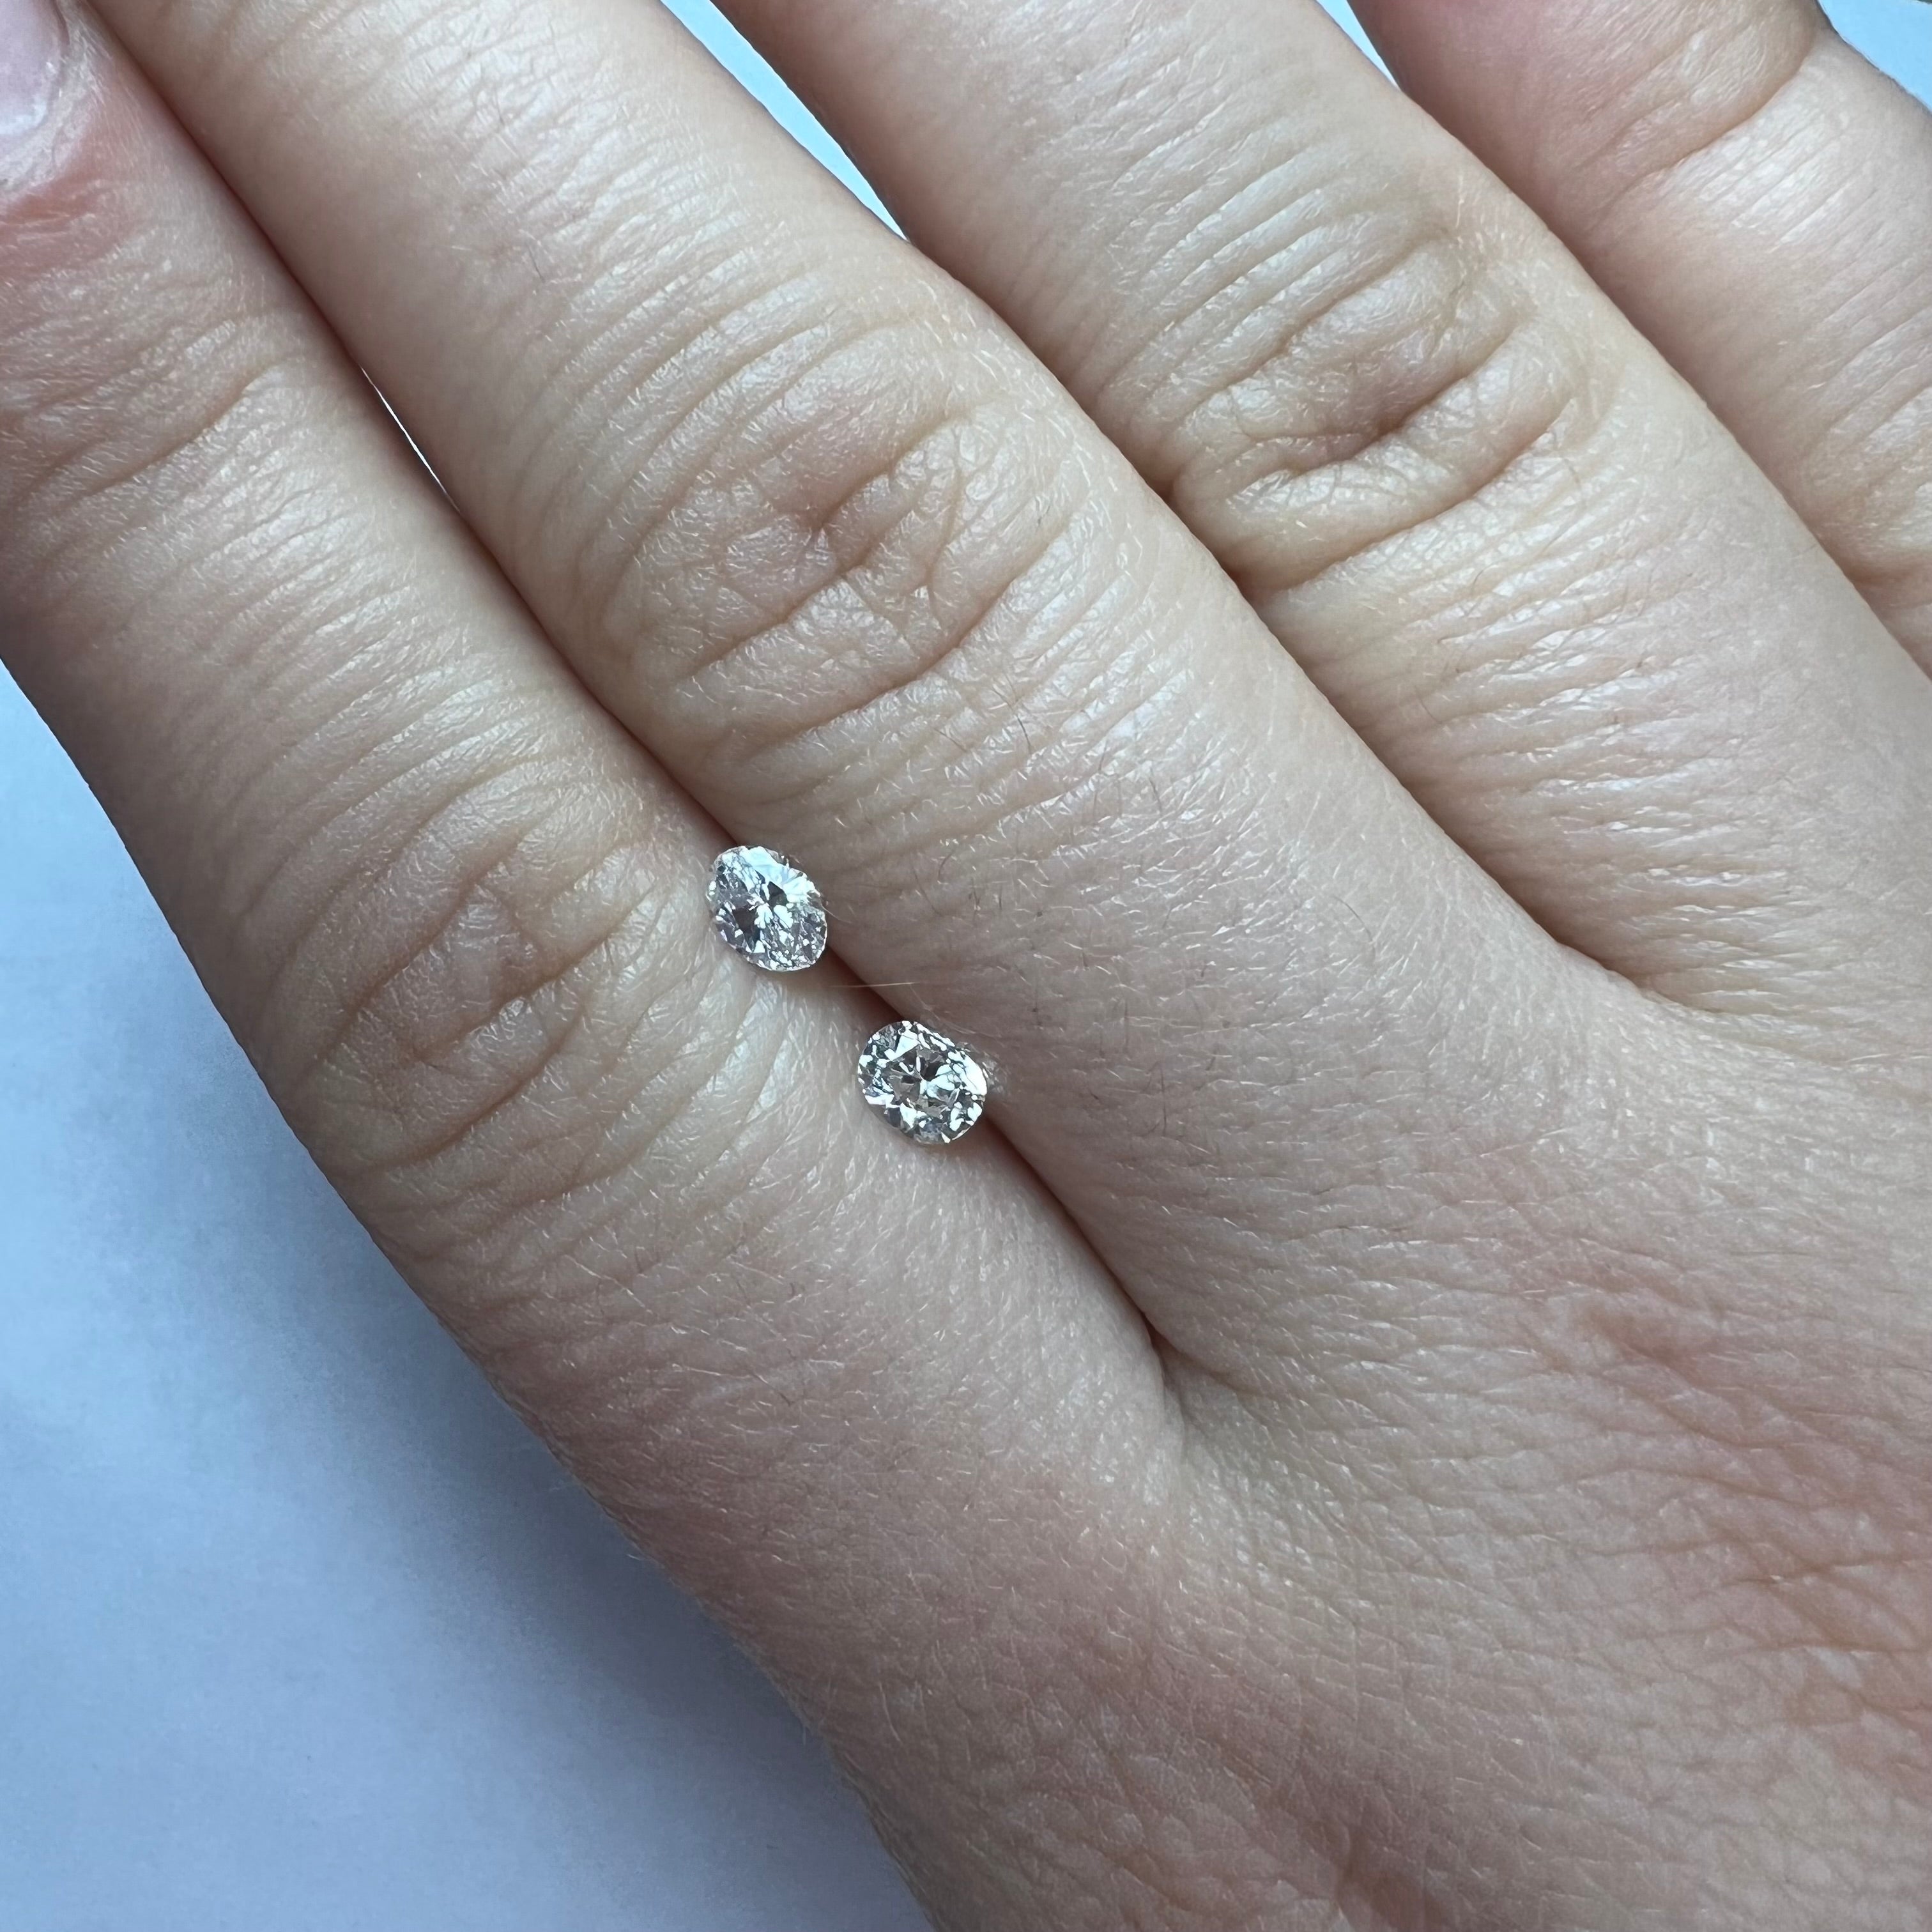 .56CTW Pair of Natural Oval Cut Diamonds SI2 K-M Natural and Earth mined